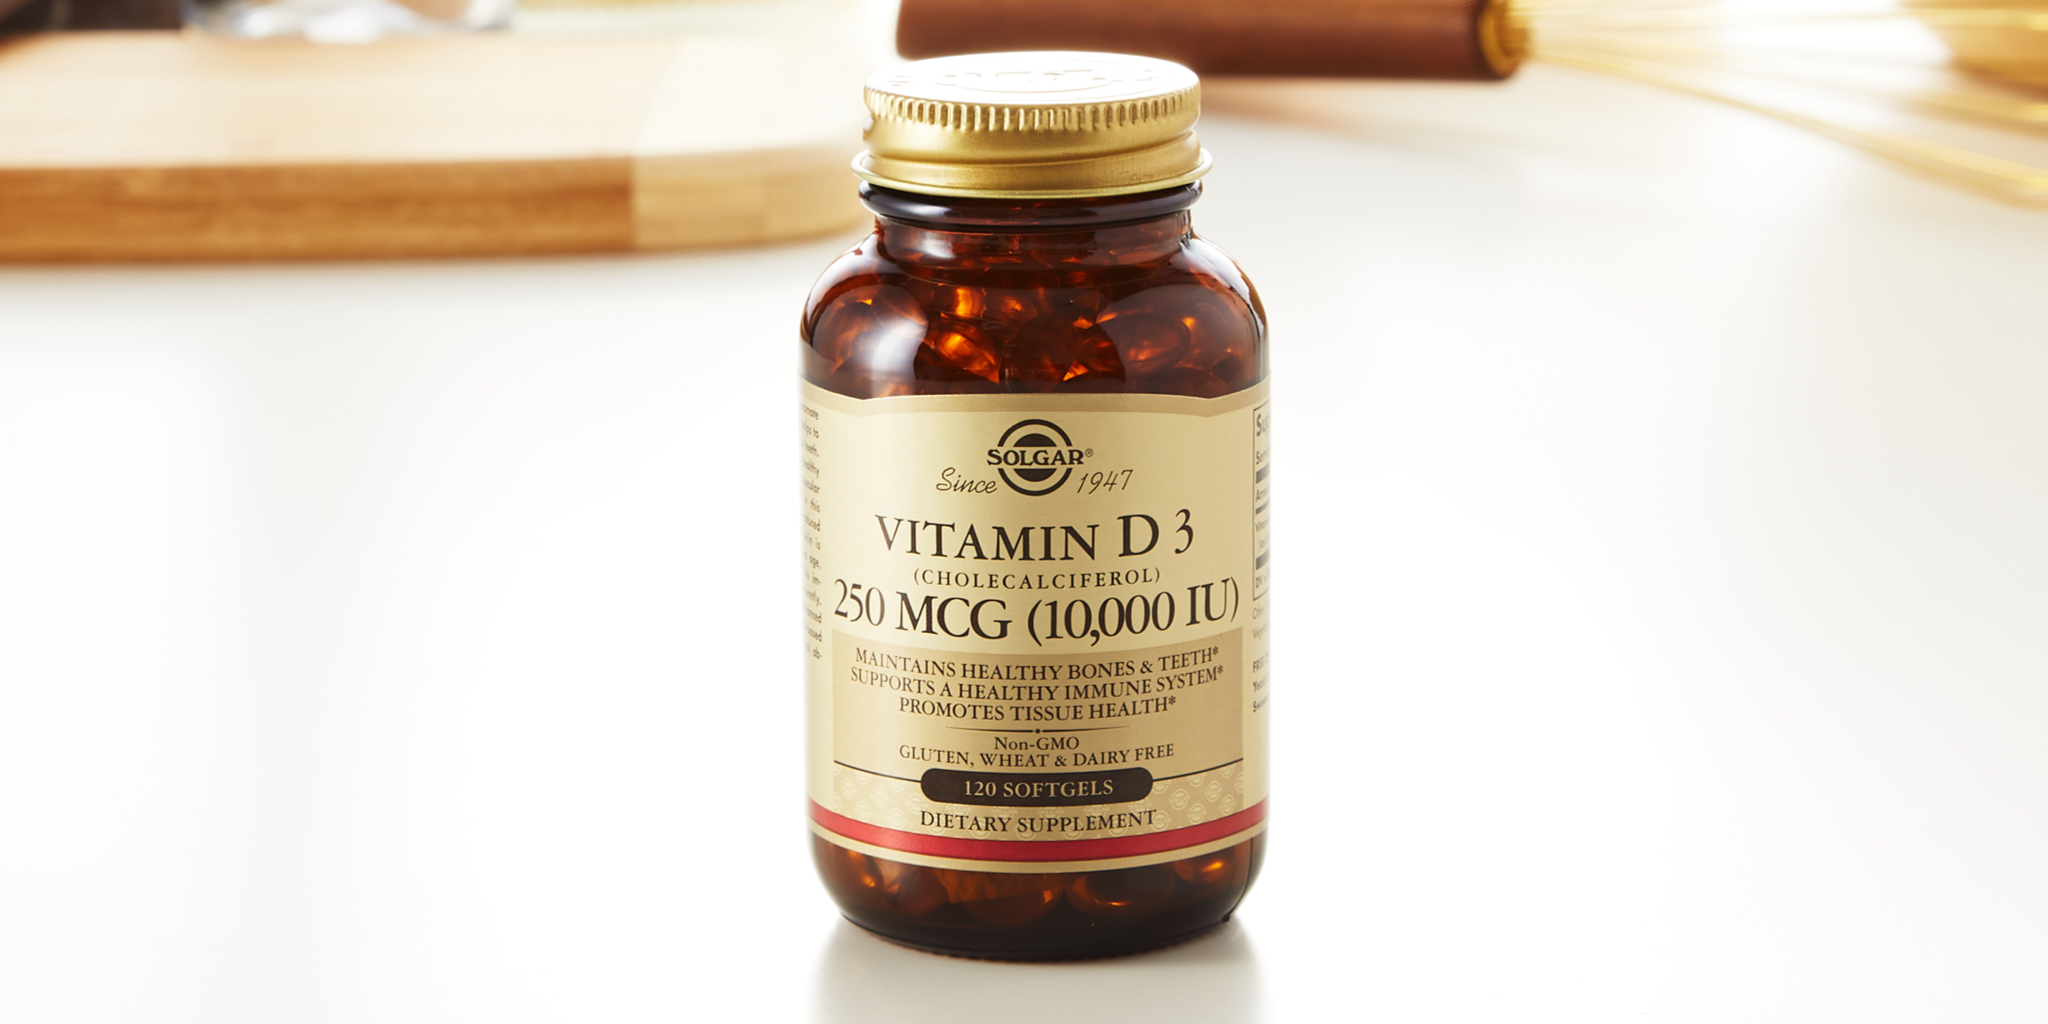 A closeup of a bottle of Solgar Vitamin D3 250mcg (10,000 IU) on a white background in front of kitchen items.